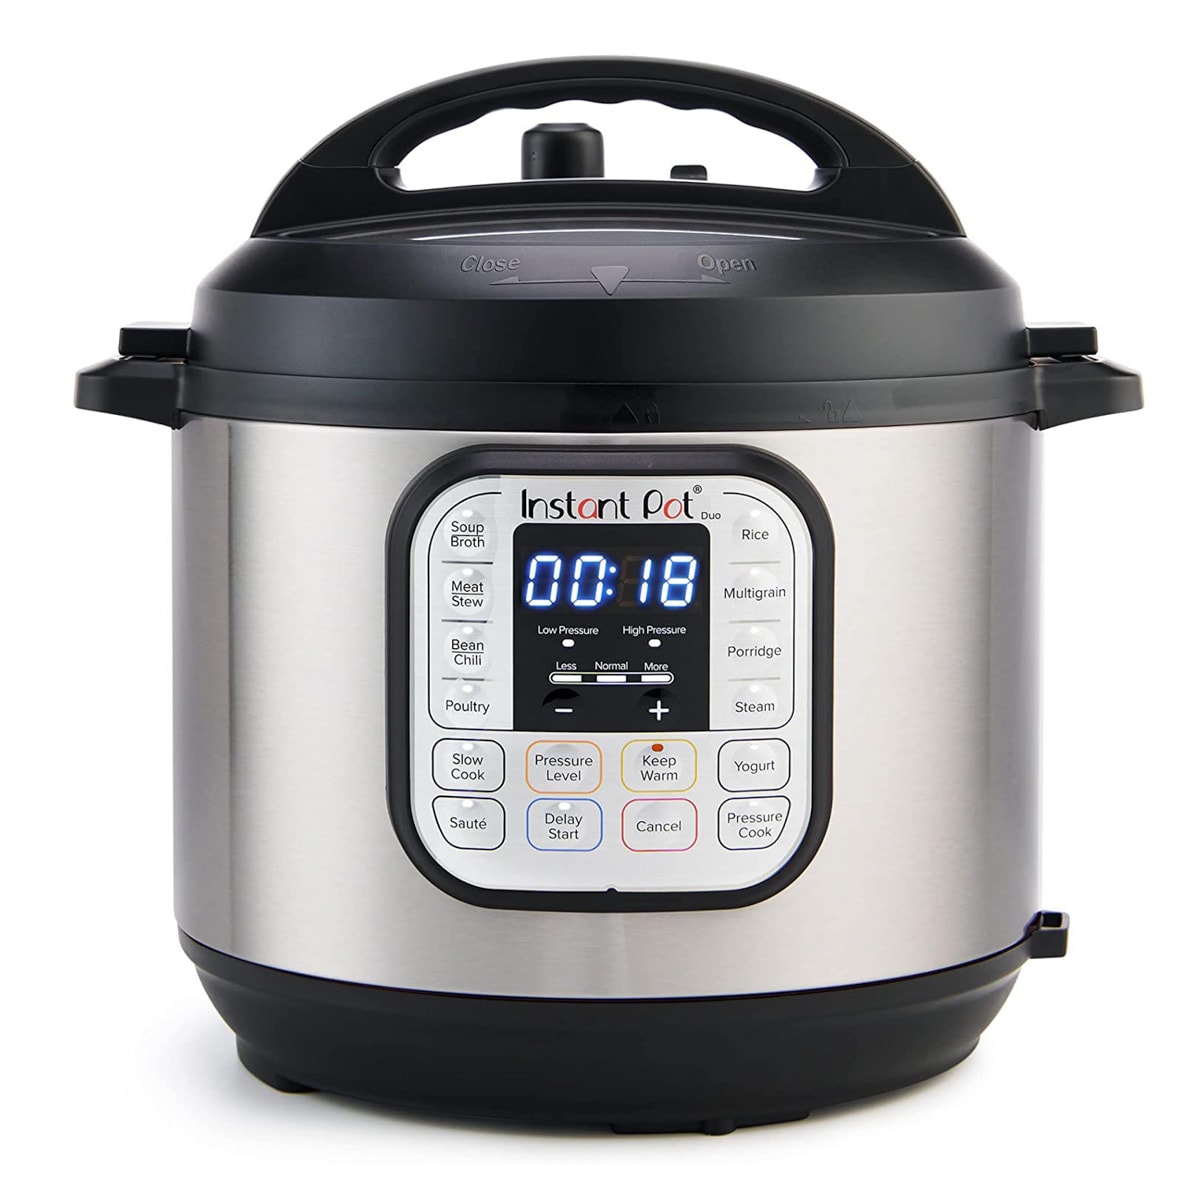 An instant pot for cooking rice.